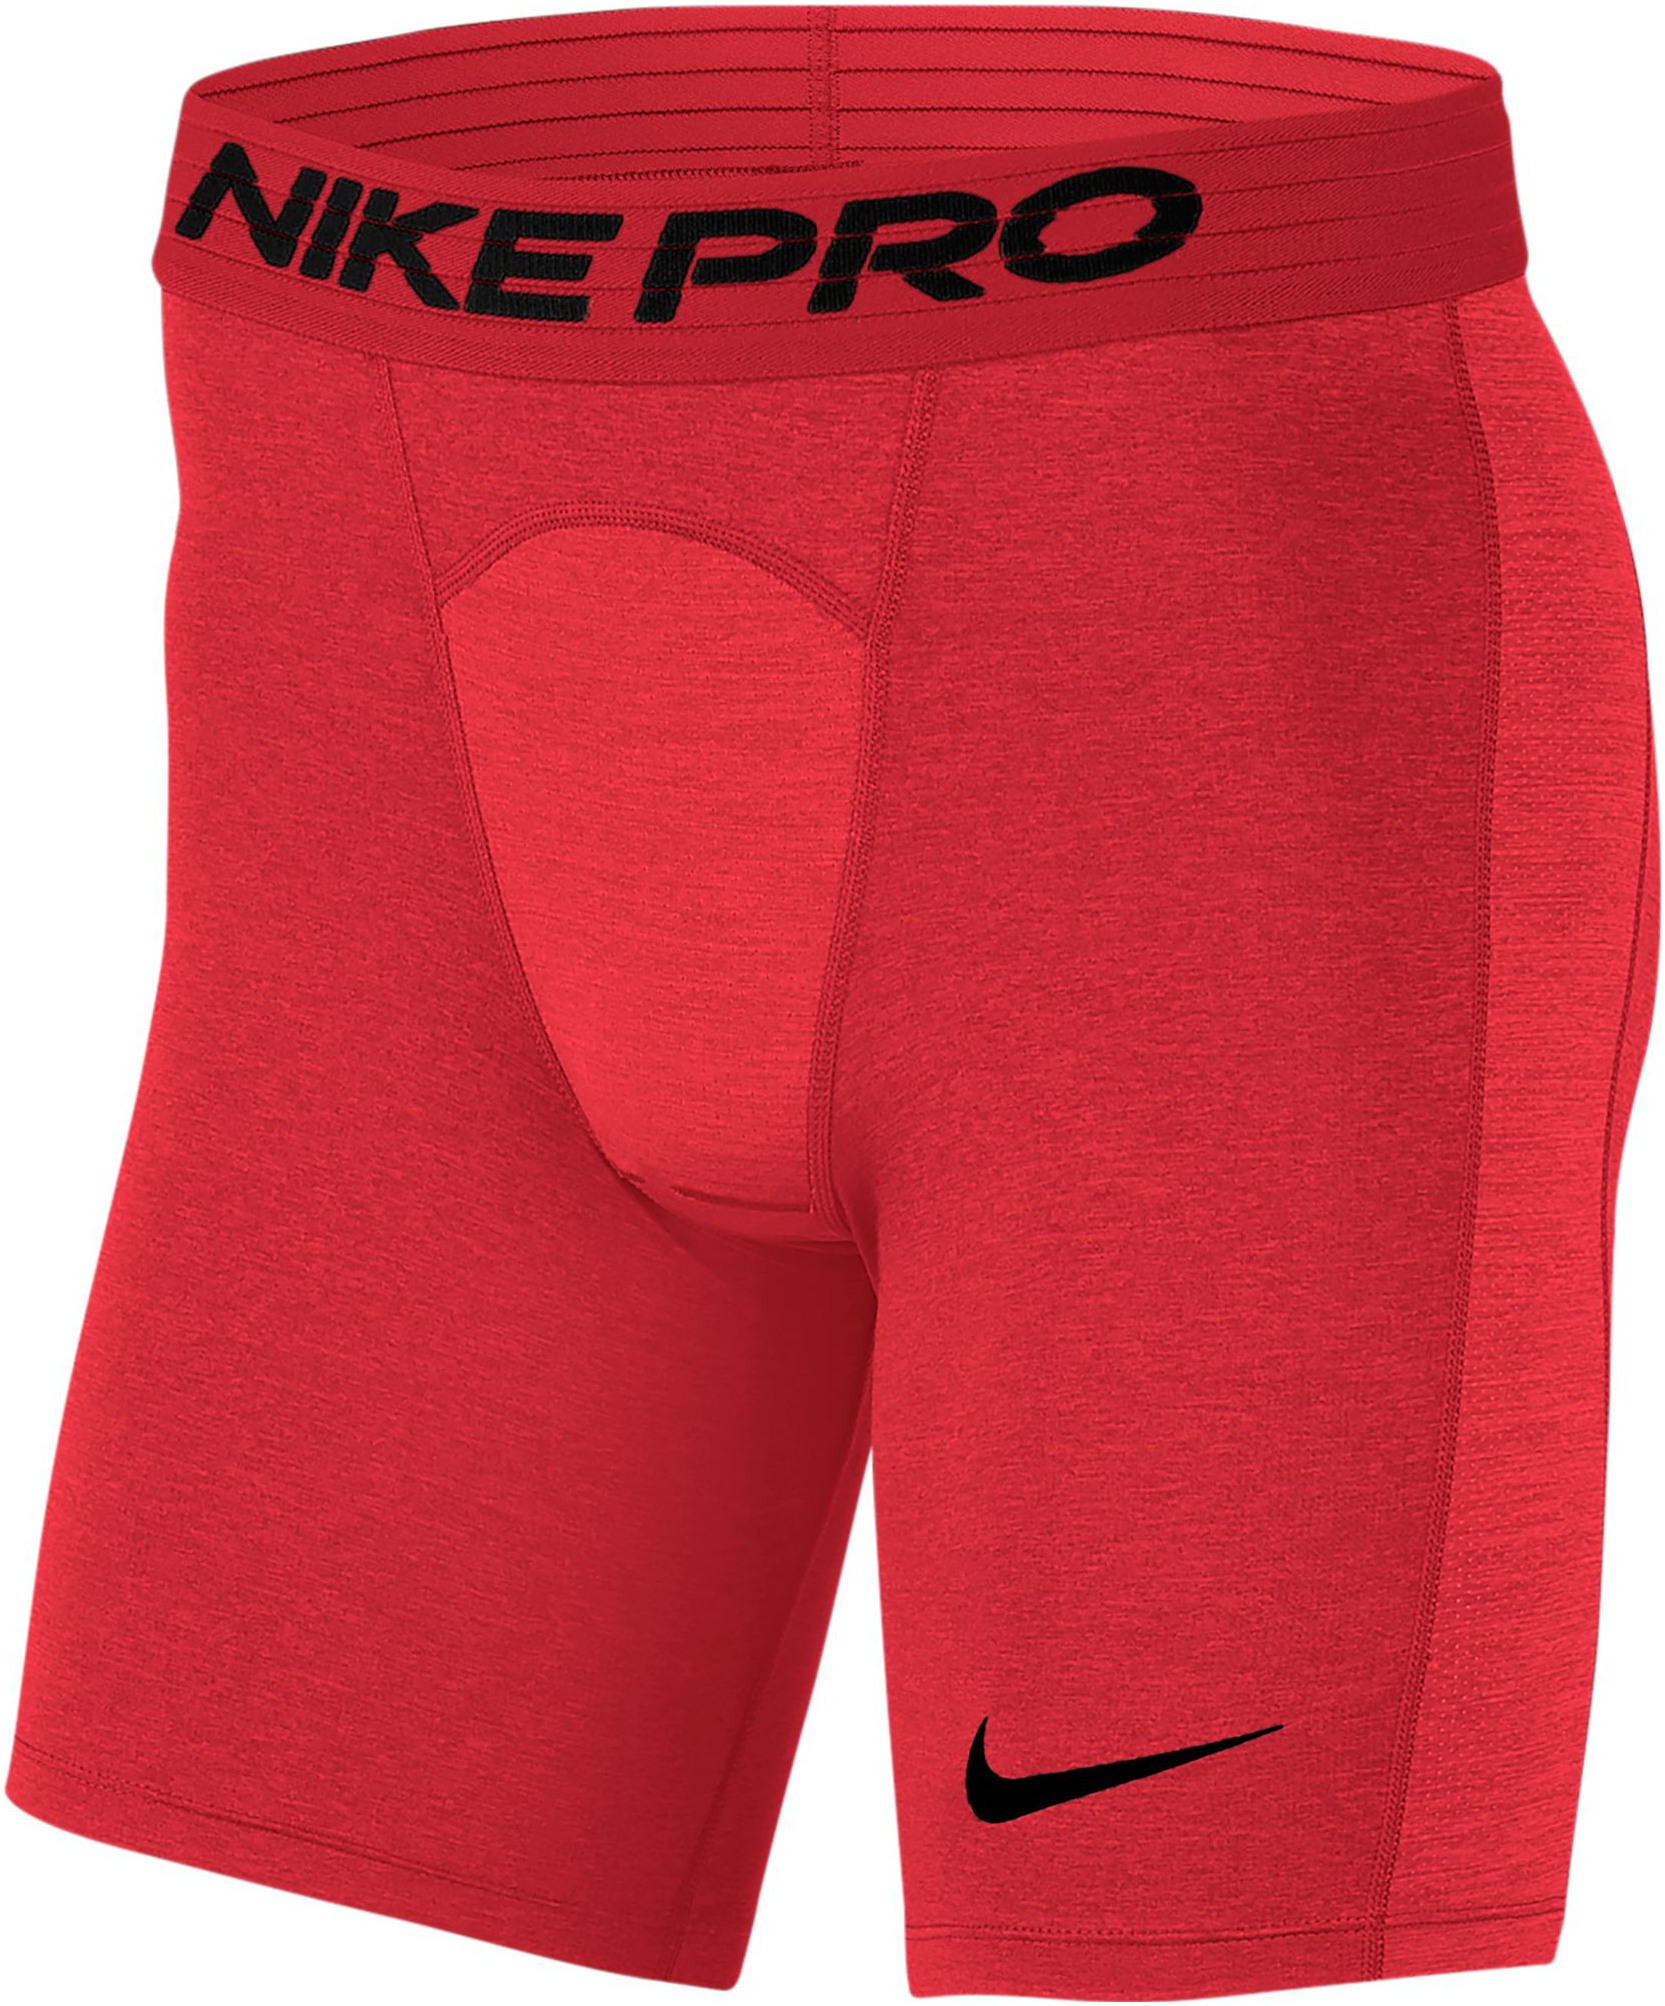 Mens compression shorts Nike PRO red